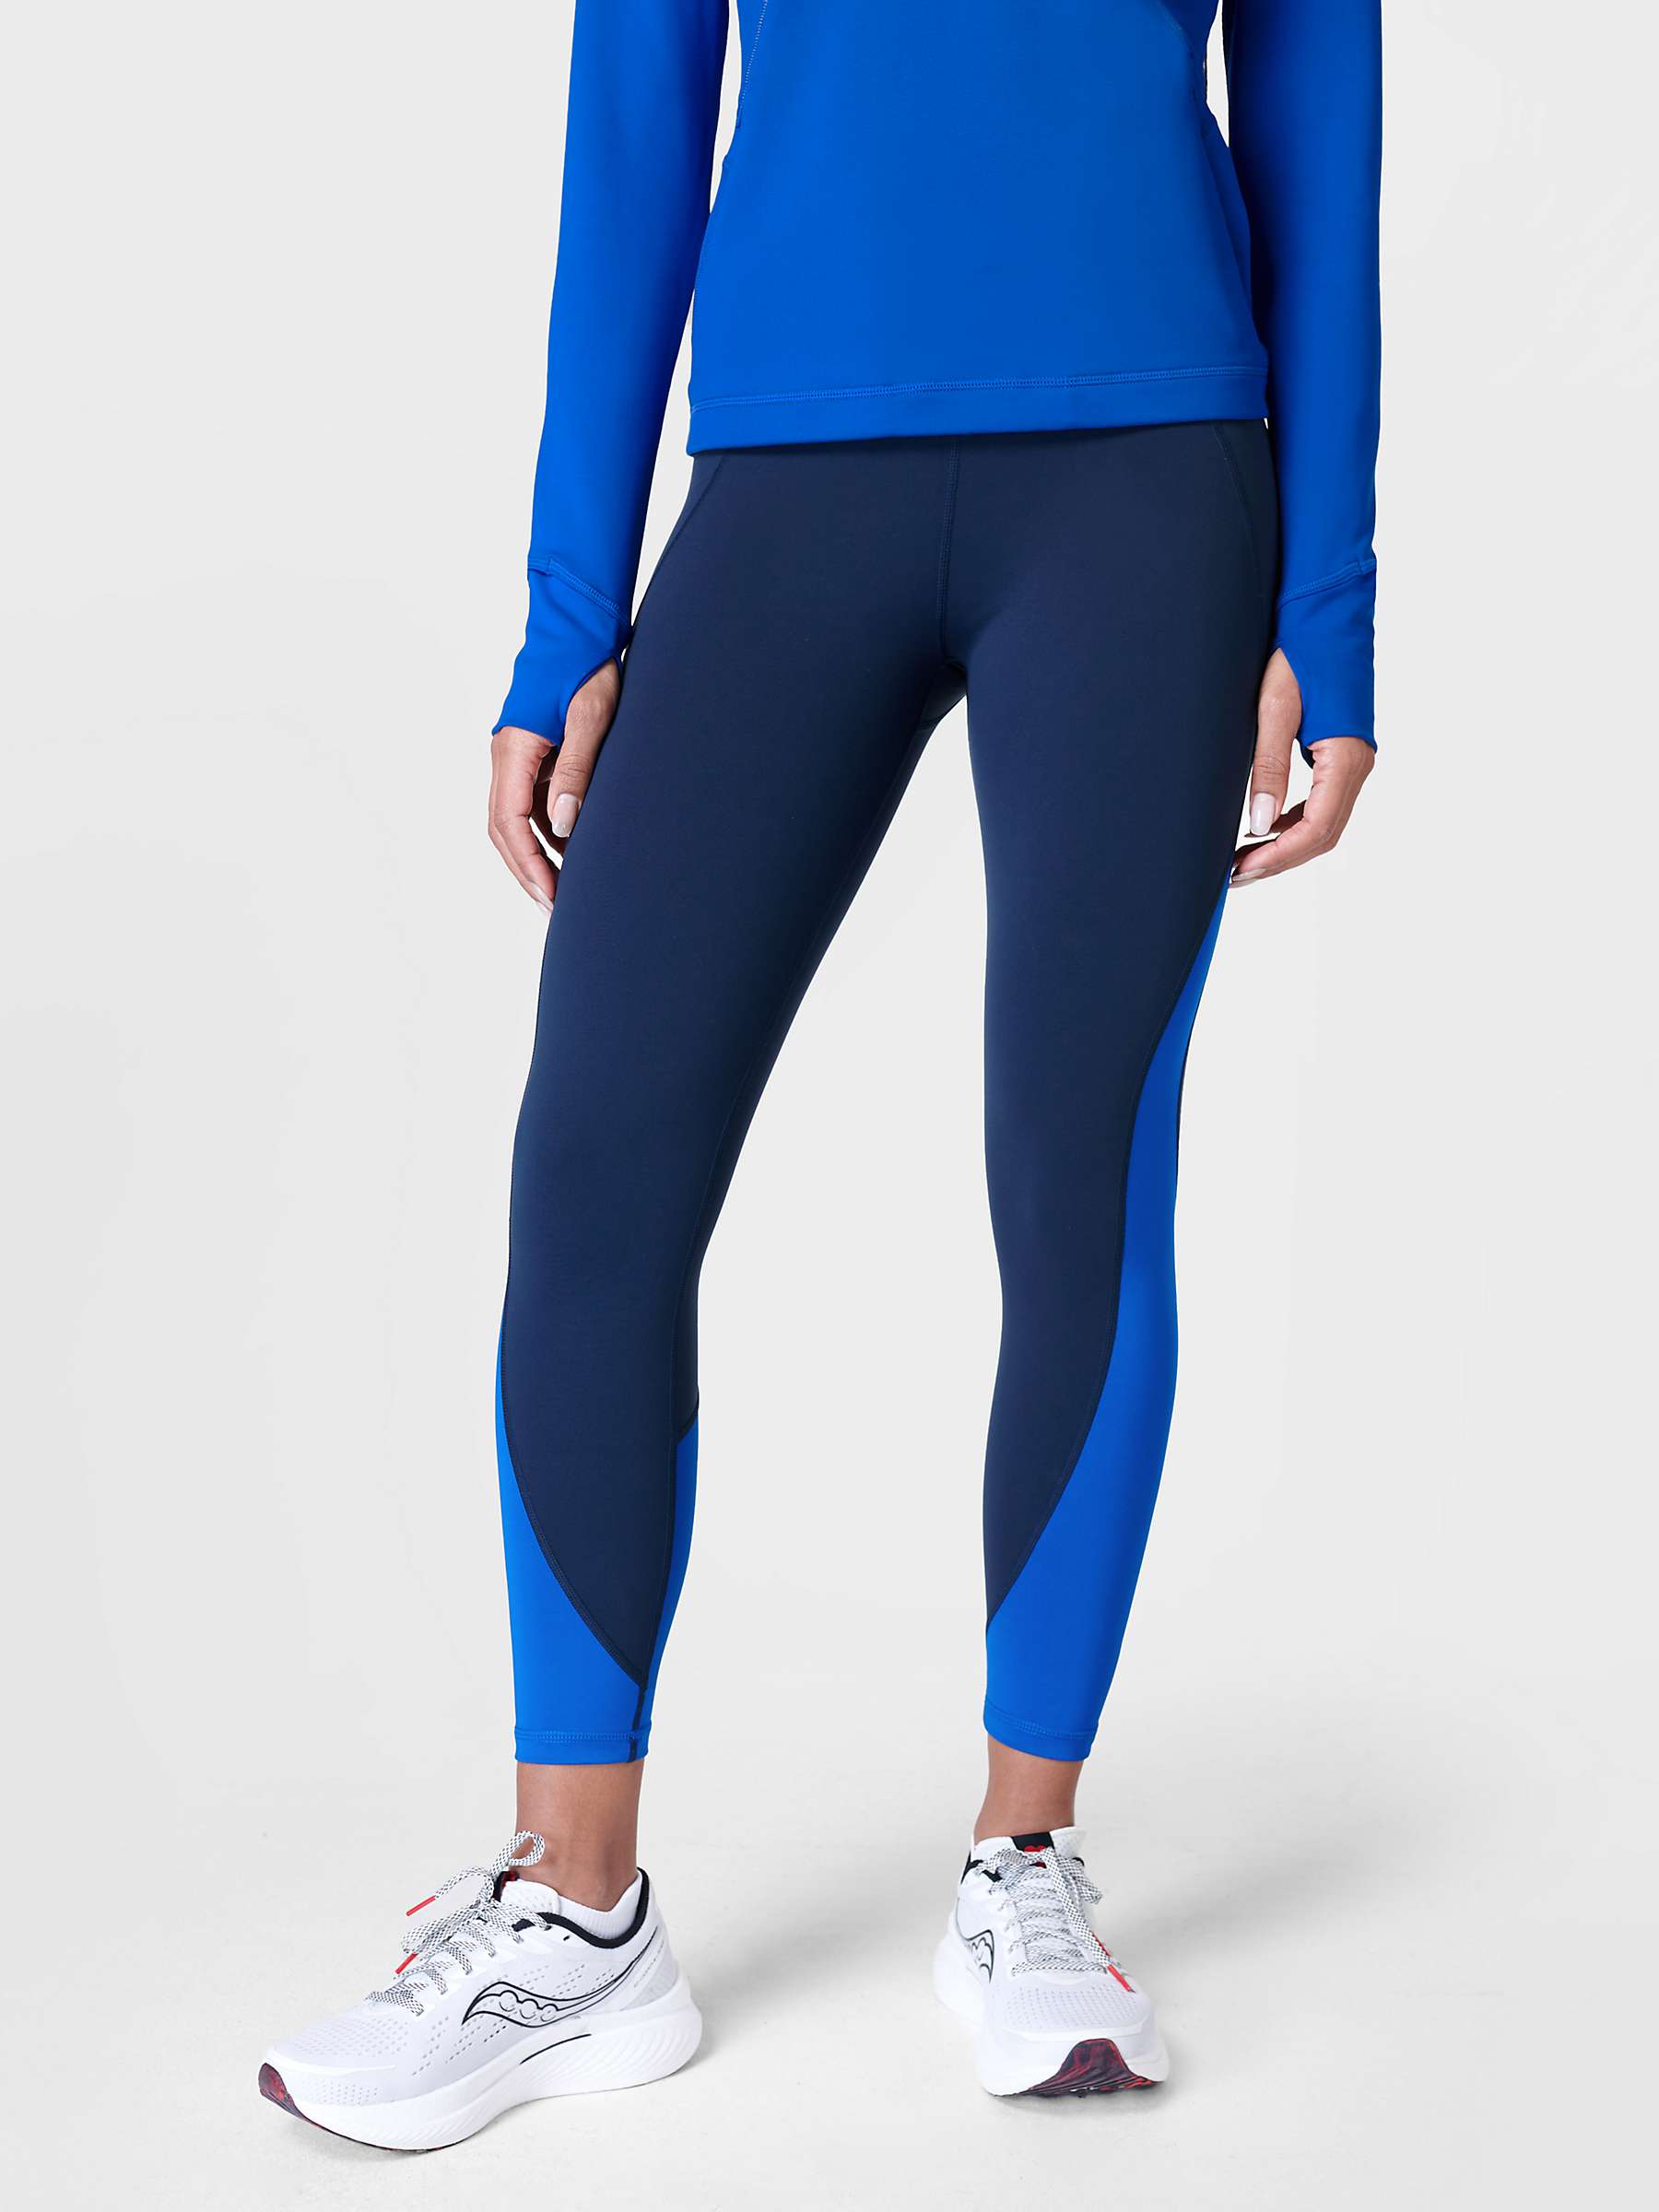 Buy Sweaty Betty Power 7/8 Workout Colour Curve Leggings, Lightning Blue/Navy Online at johnlewis.com